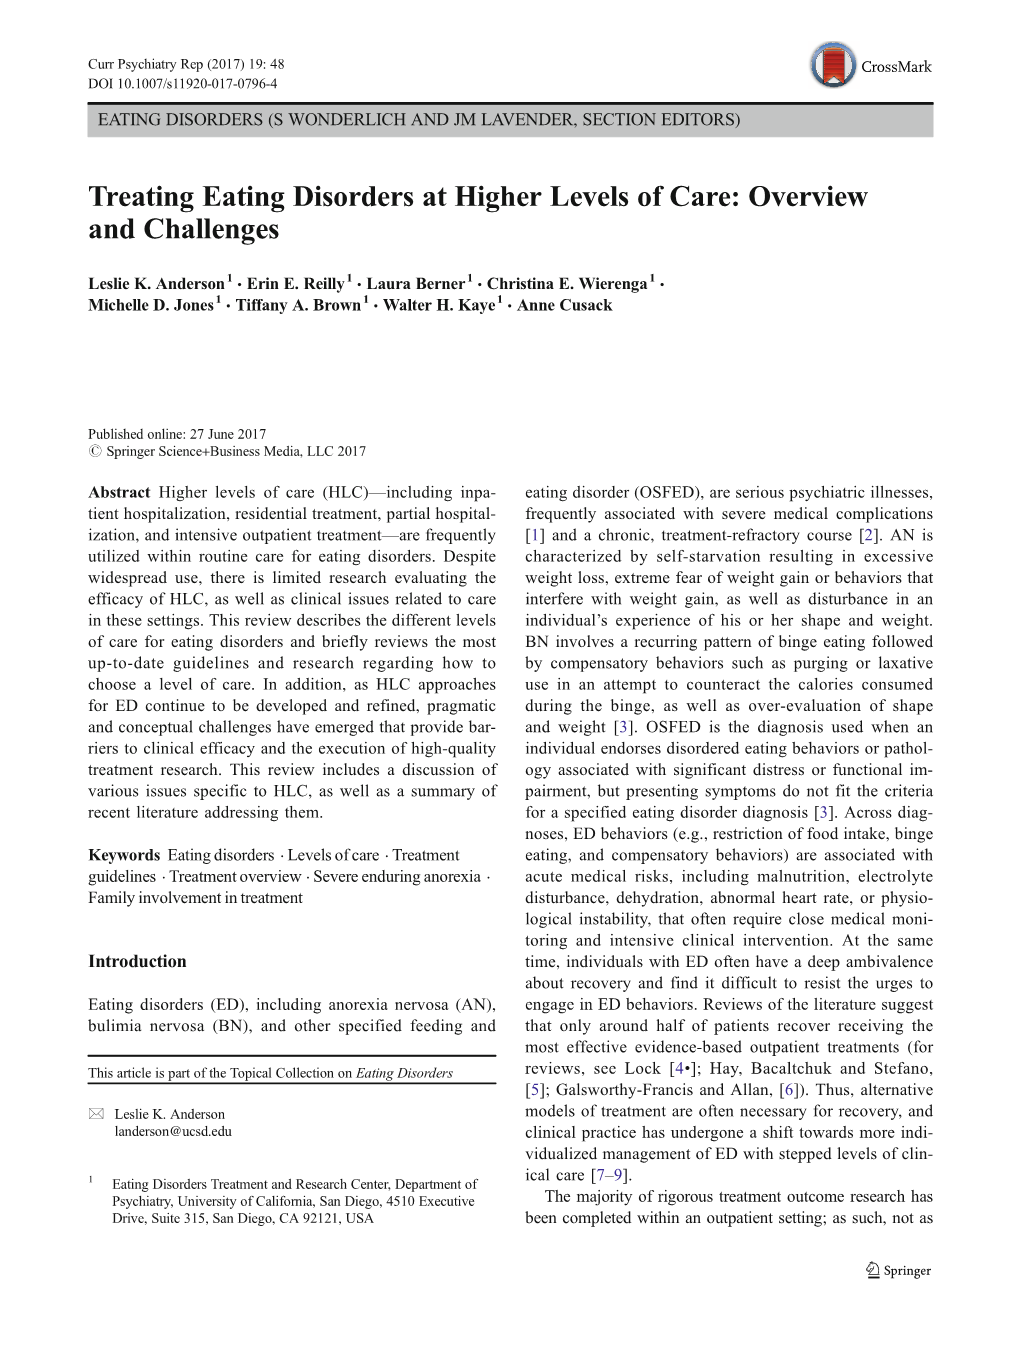 Treating Eating Disorders at Higher Levels of Care: Overview and Challenges